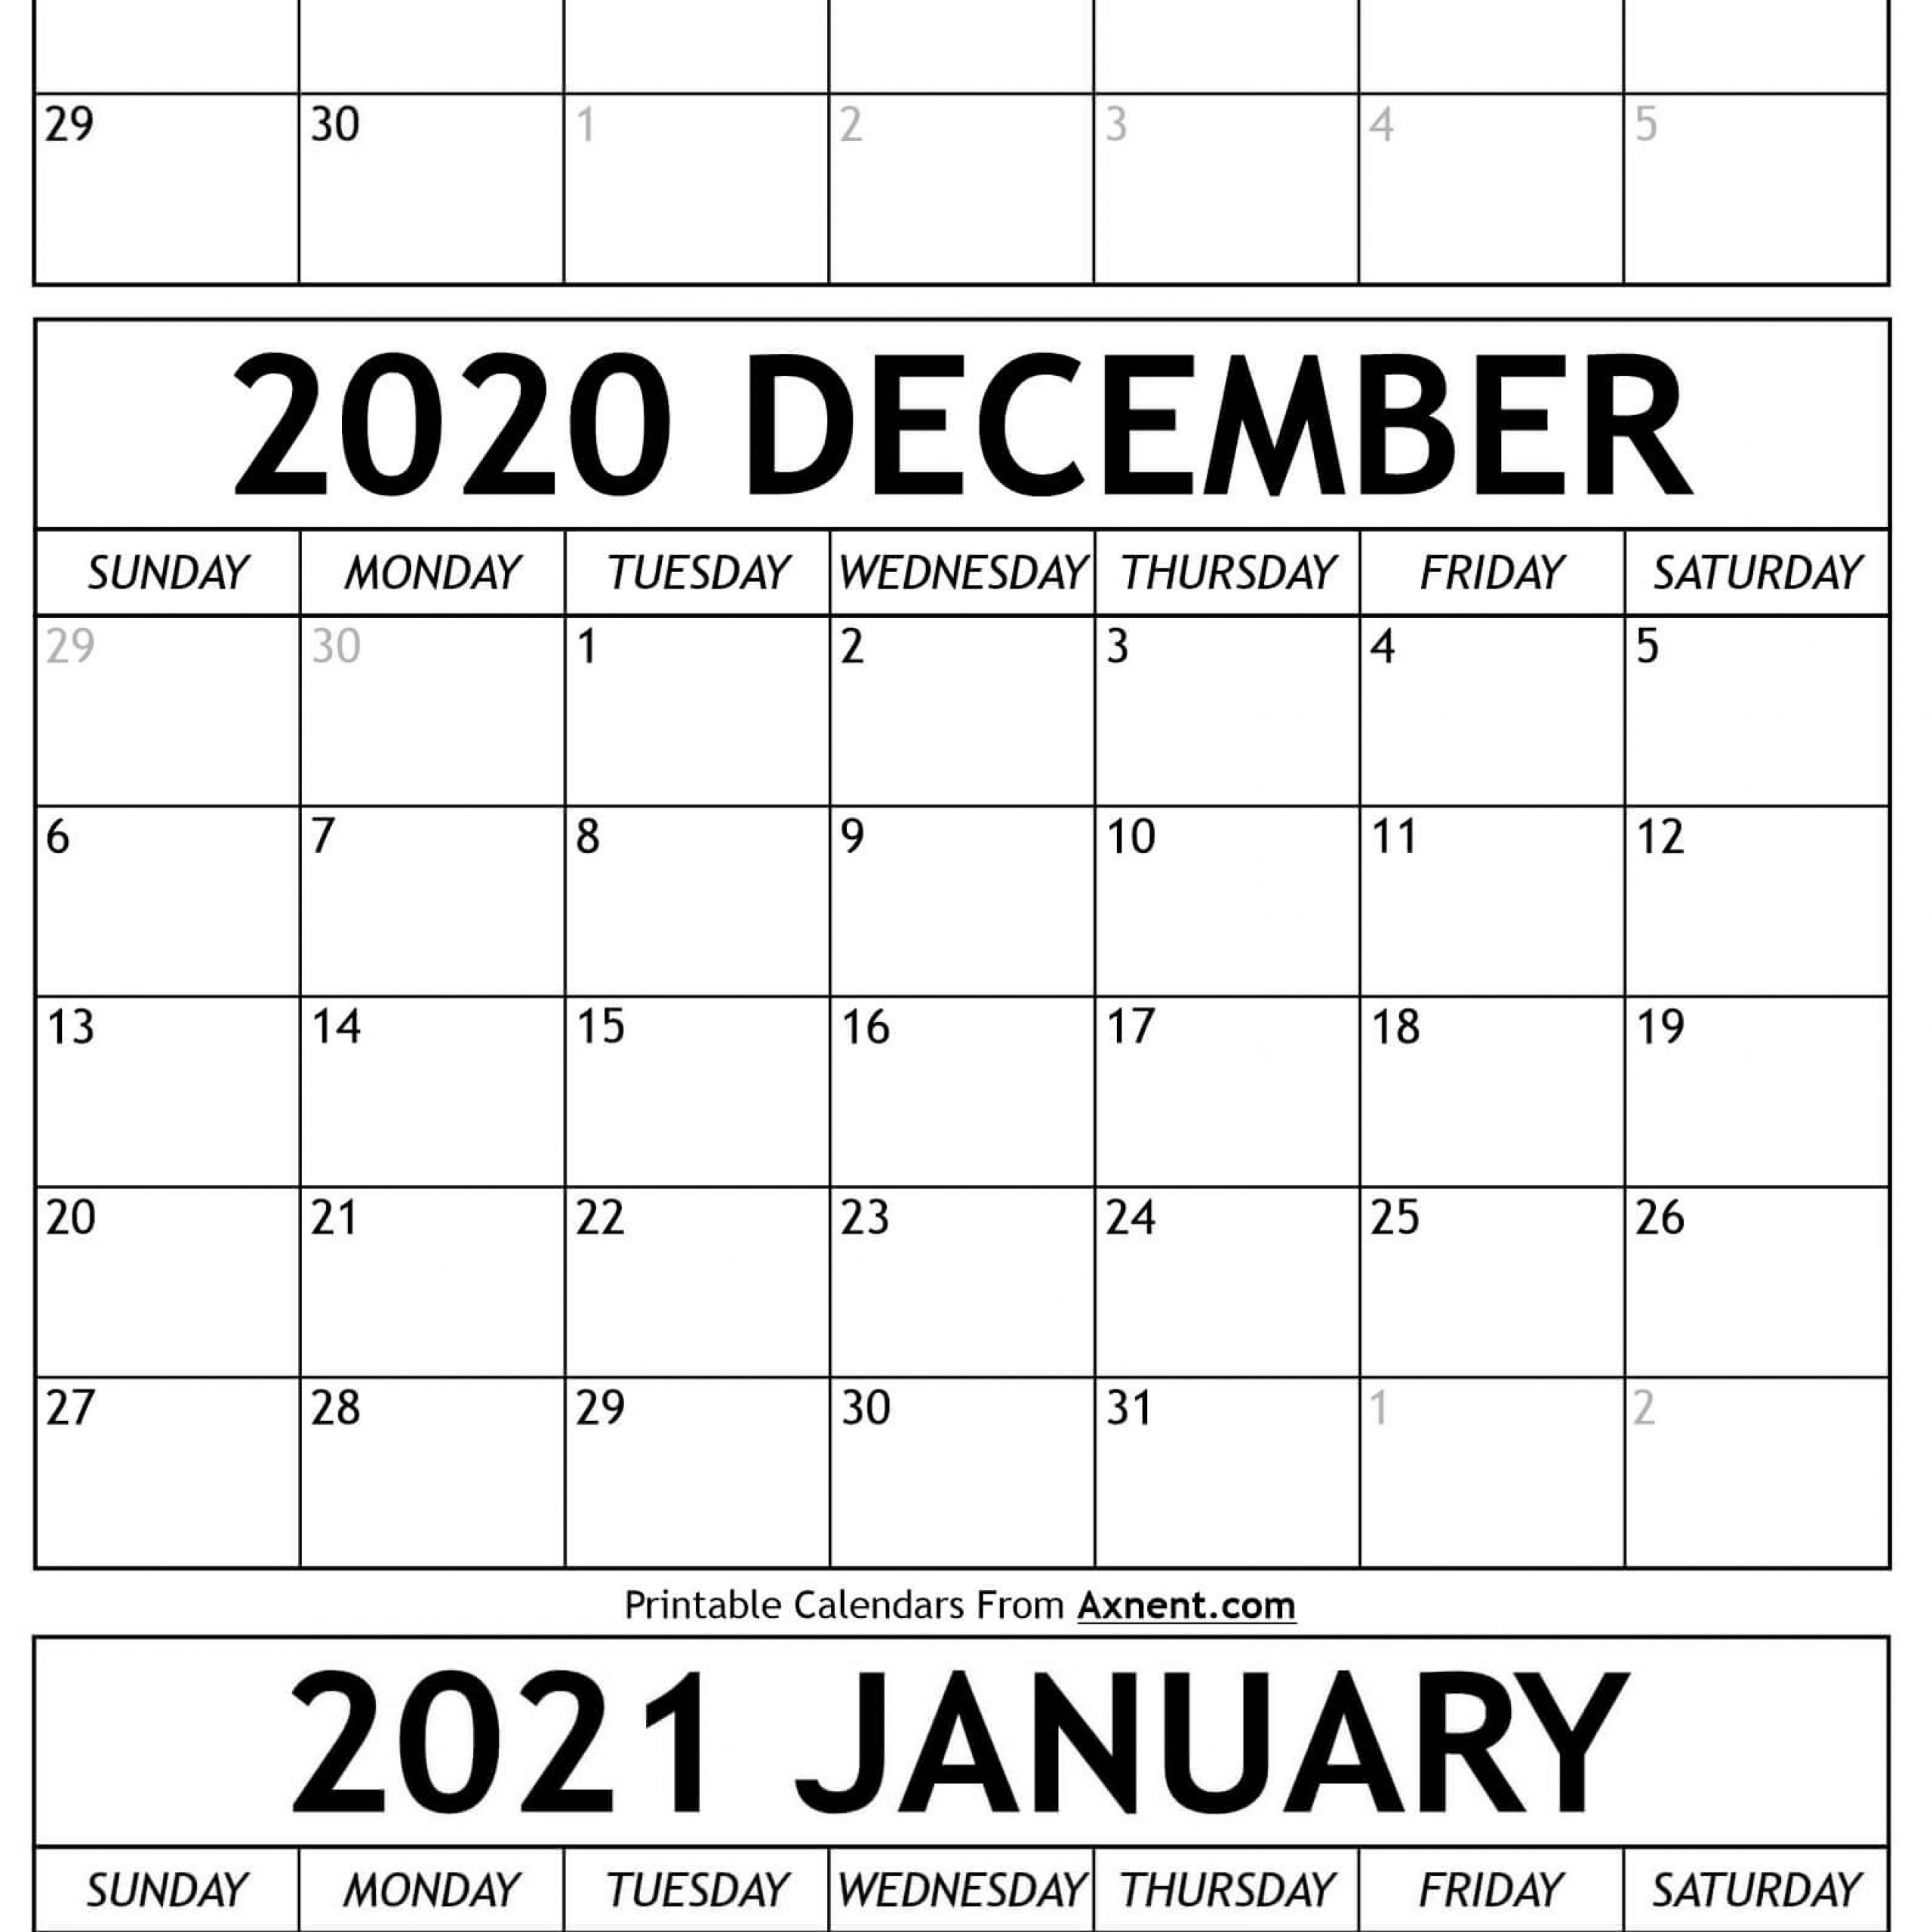 Printable Monthly Calendar December 2020 And January 2021 | Free Printable Calendar Printable Monthly Calendar December 2020 And January 2021